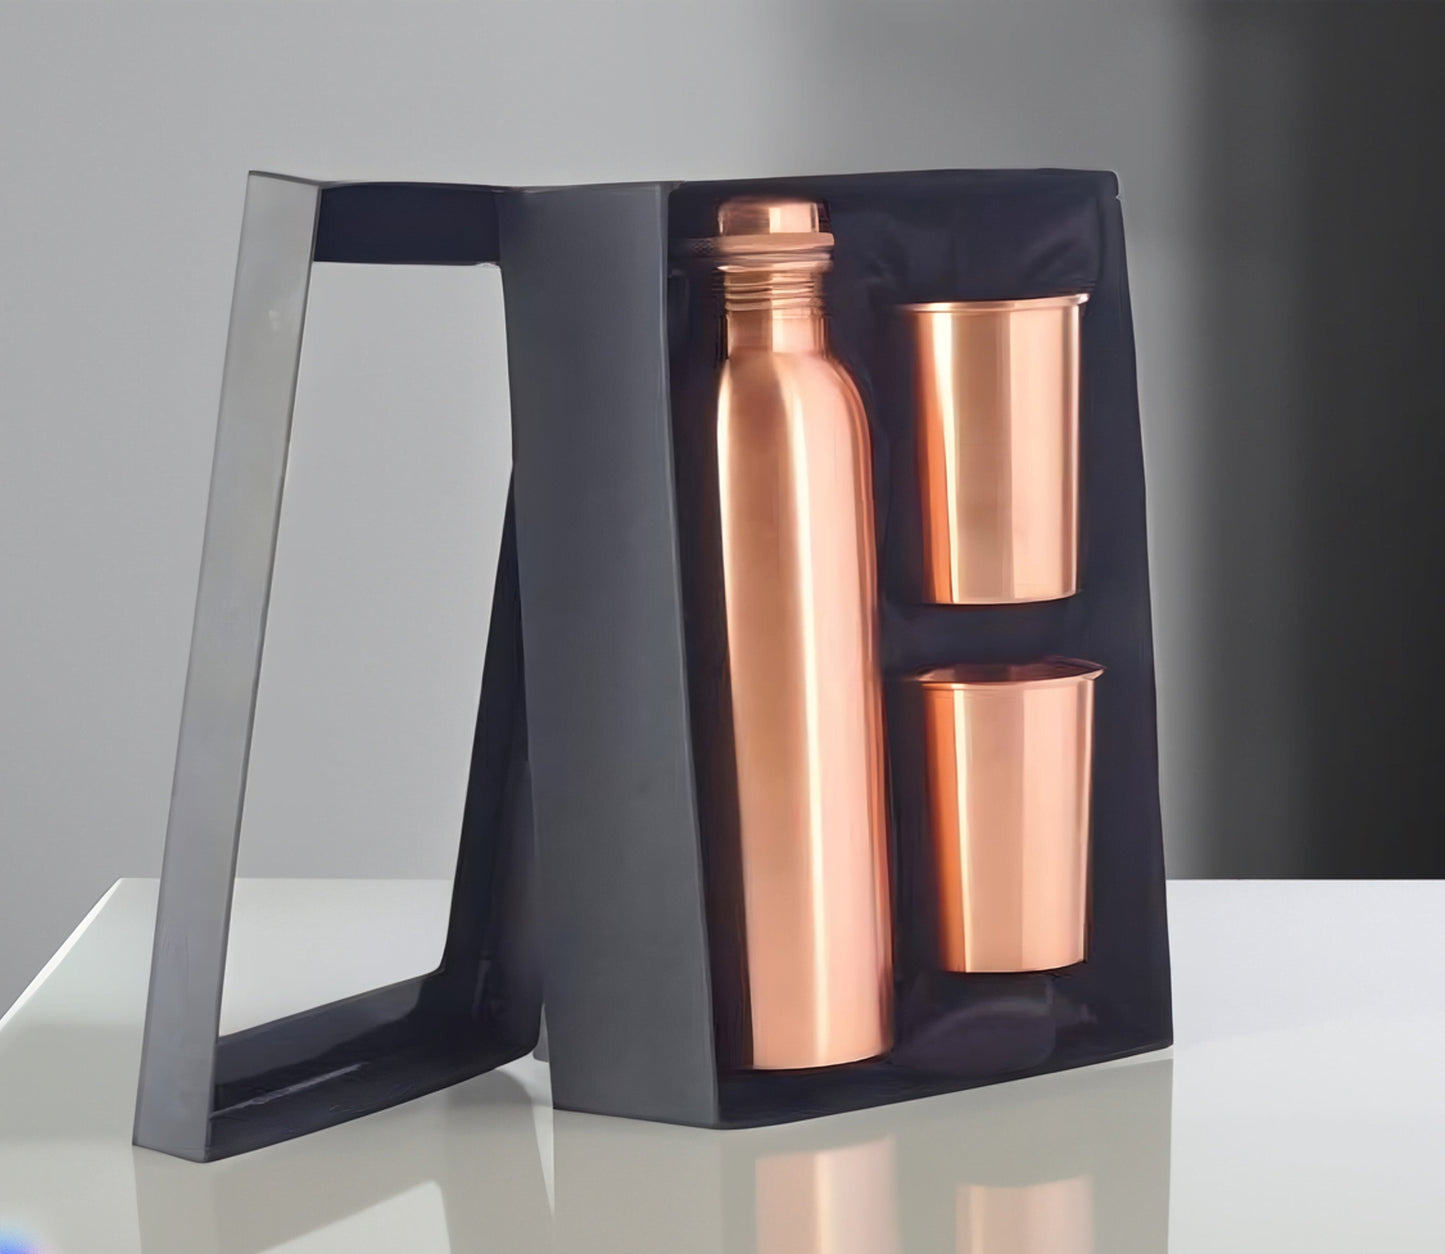 Copper bottle with glass gift set